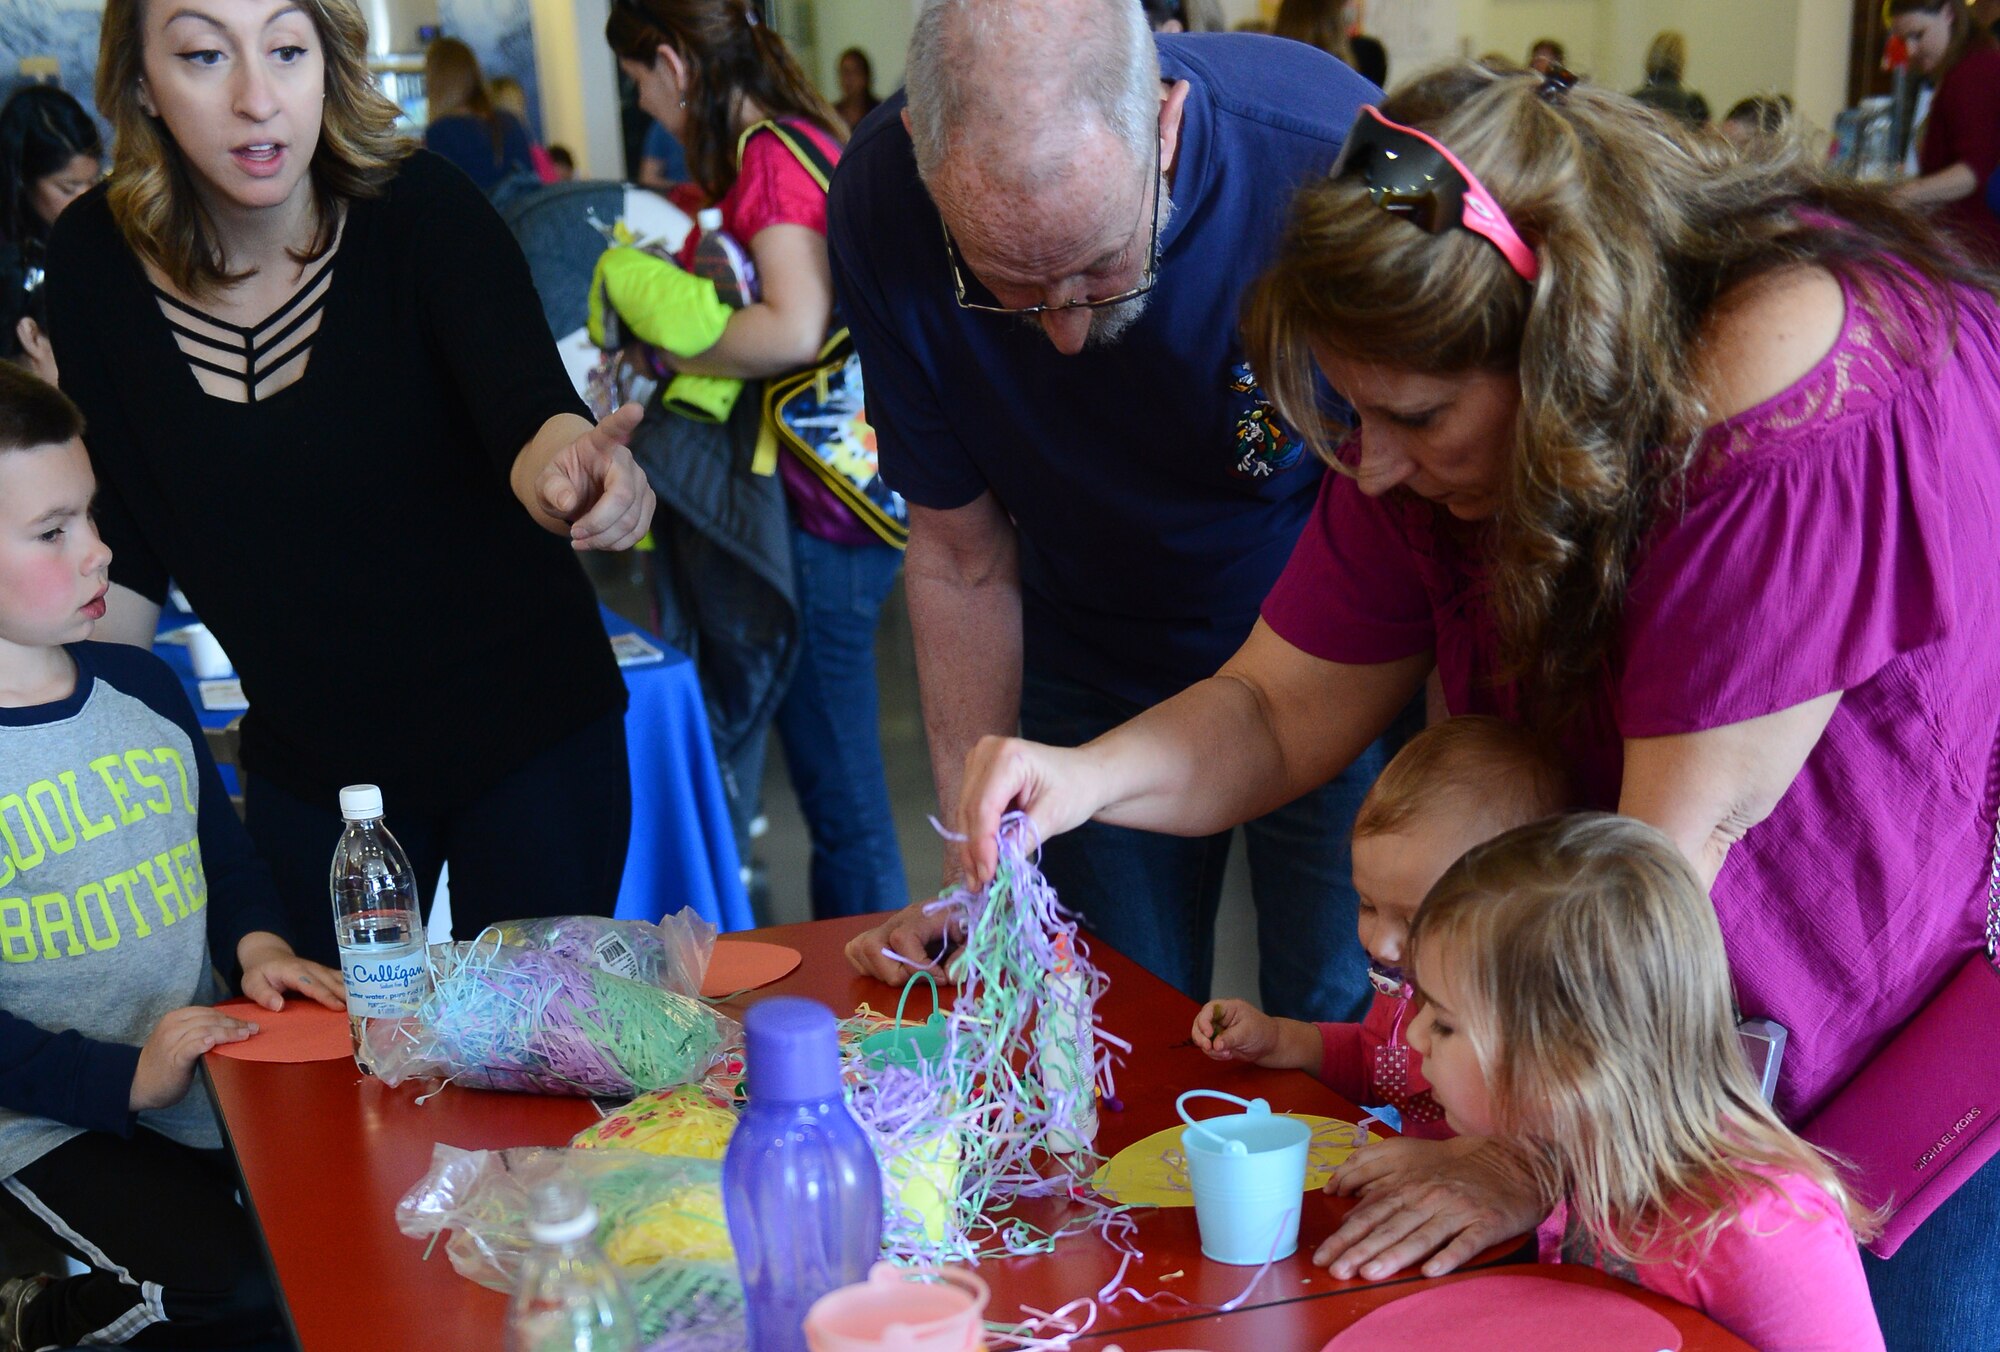 Spangdahlem families decorate paper eggs during the fourth annual Spring Fling event held at the Base Exchange at Spangdahlem Air Base, Germany, April 14, 2017. The Exceptional Family Member Program, along with other various organizations, hosted the event to raise awareness of EFMP and the service it provides for families. (U.S. Air Force photo by Airman 1st Class Preston Cherry)